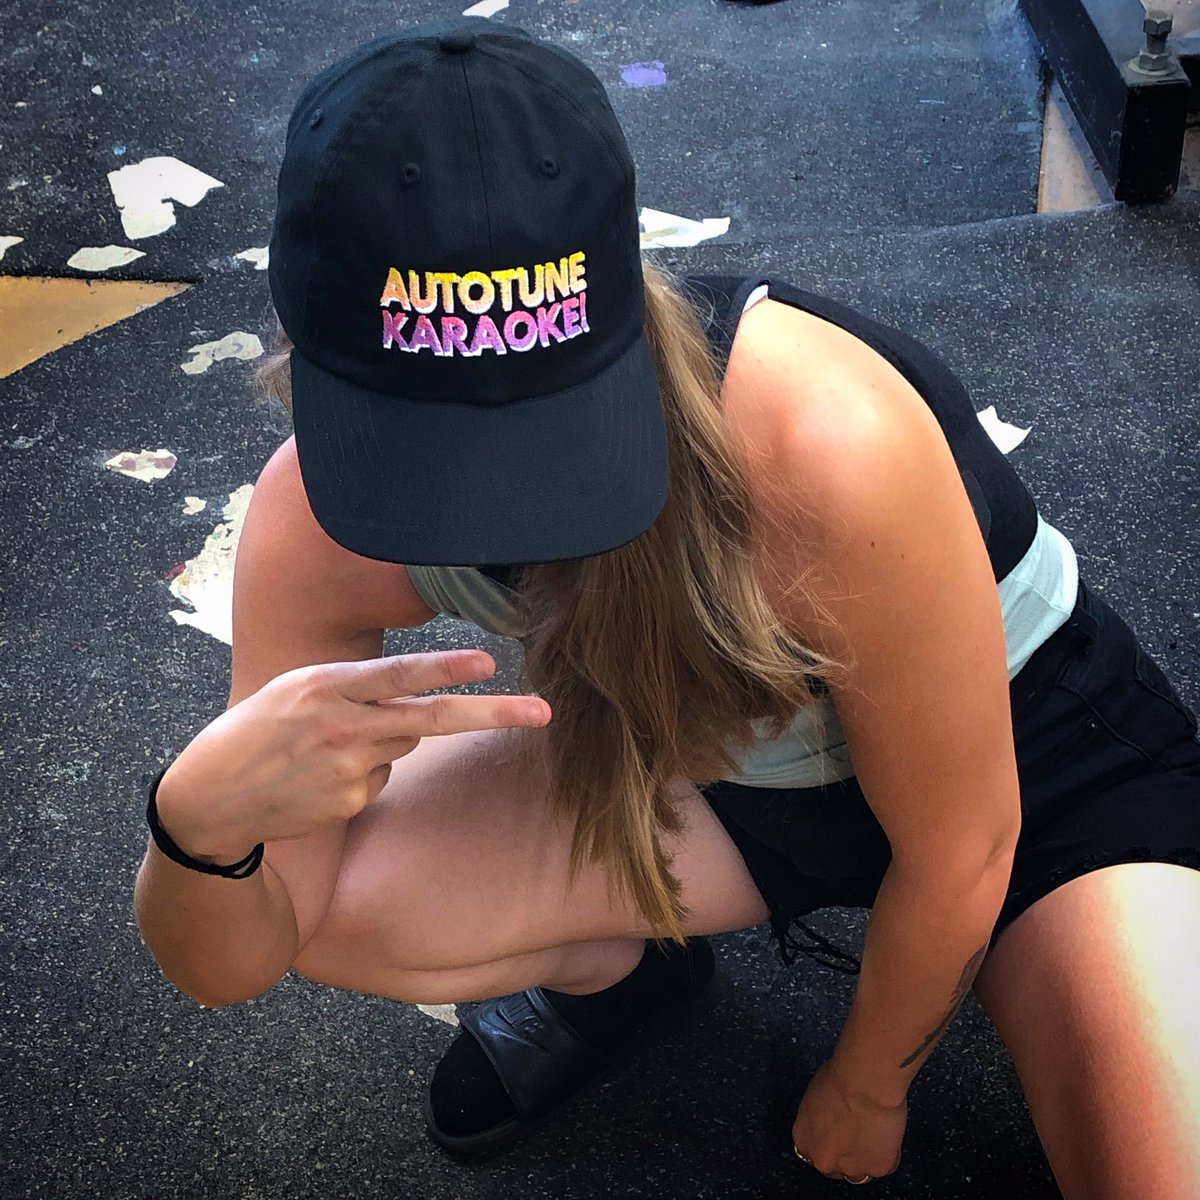 Limited edition Autotune Karaoke dad hats will be available tonight at @MortimersBar! Pull up!